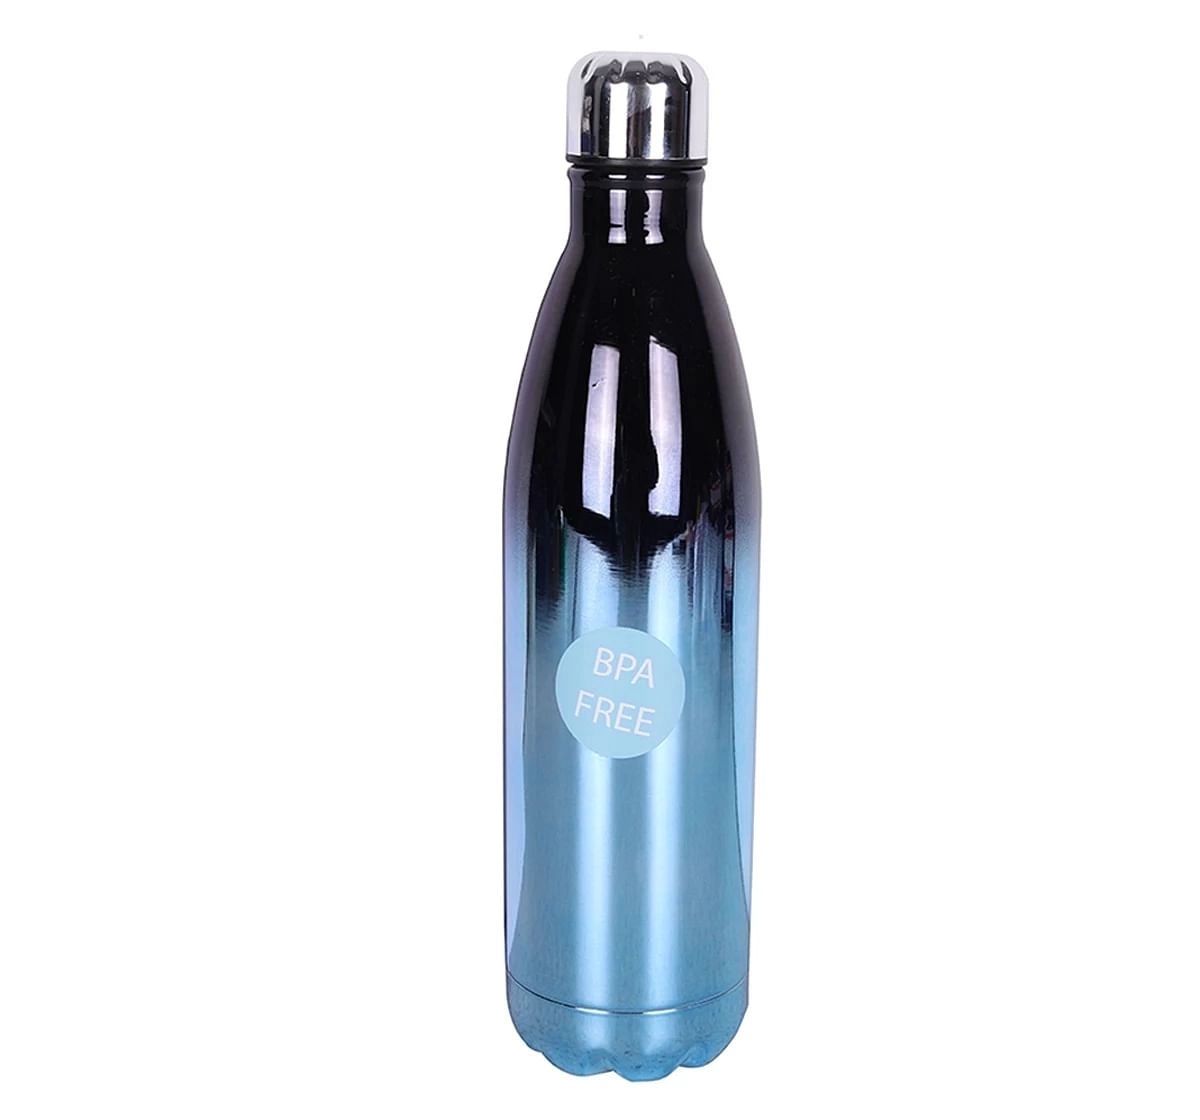 Stainless Steel Insulated Water Bottle by Hamster London for Kids, Blue & Black, Non-Toxic, BPA Free, 750ml, 5Y+